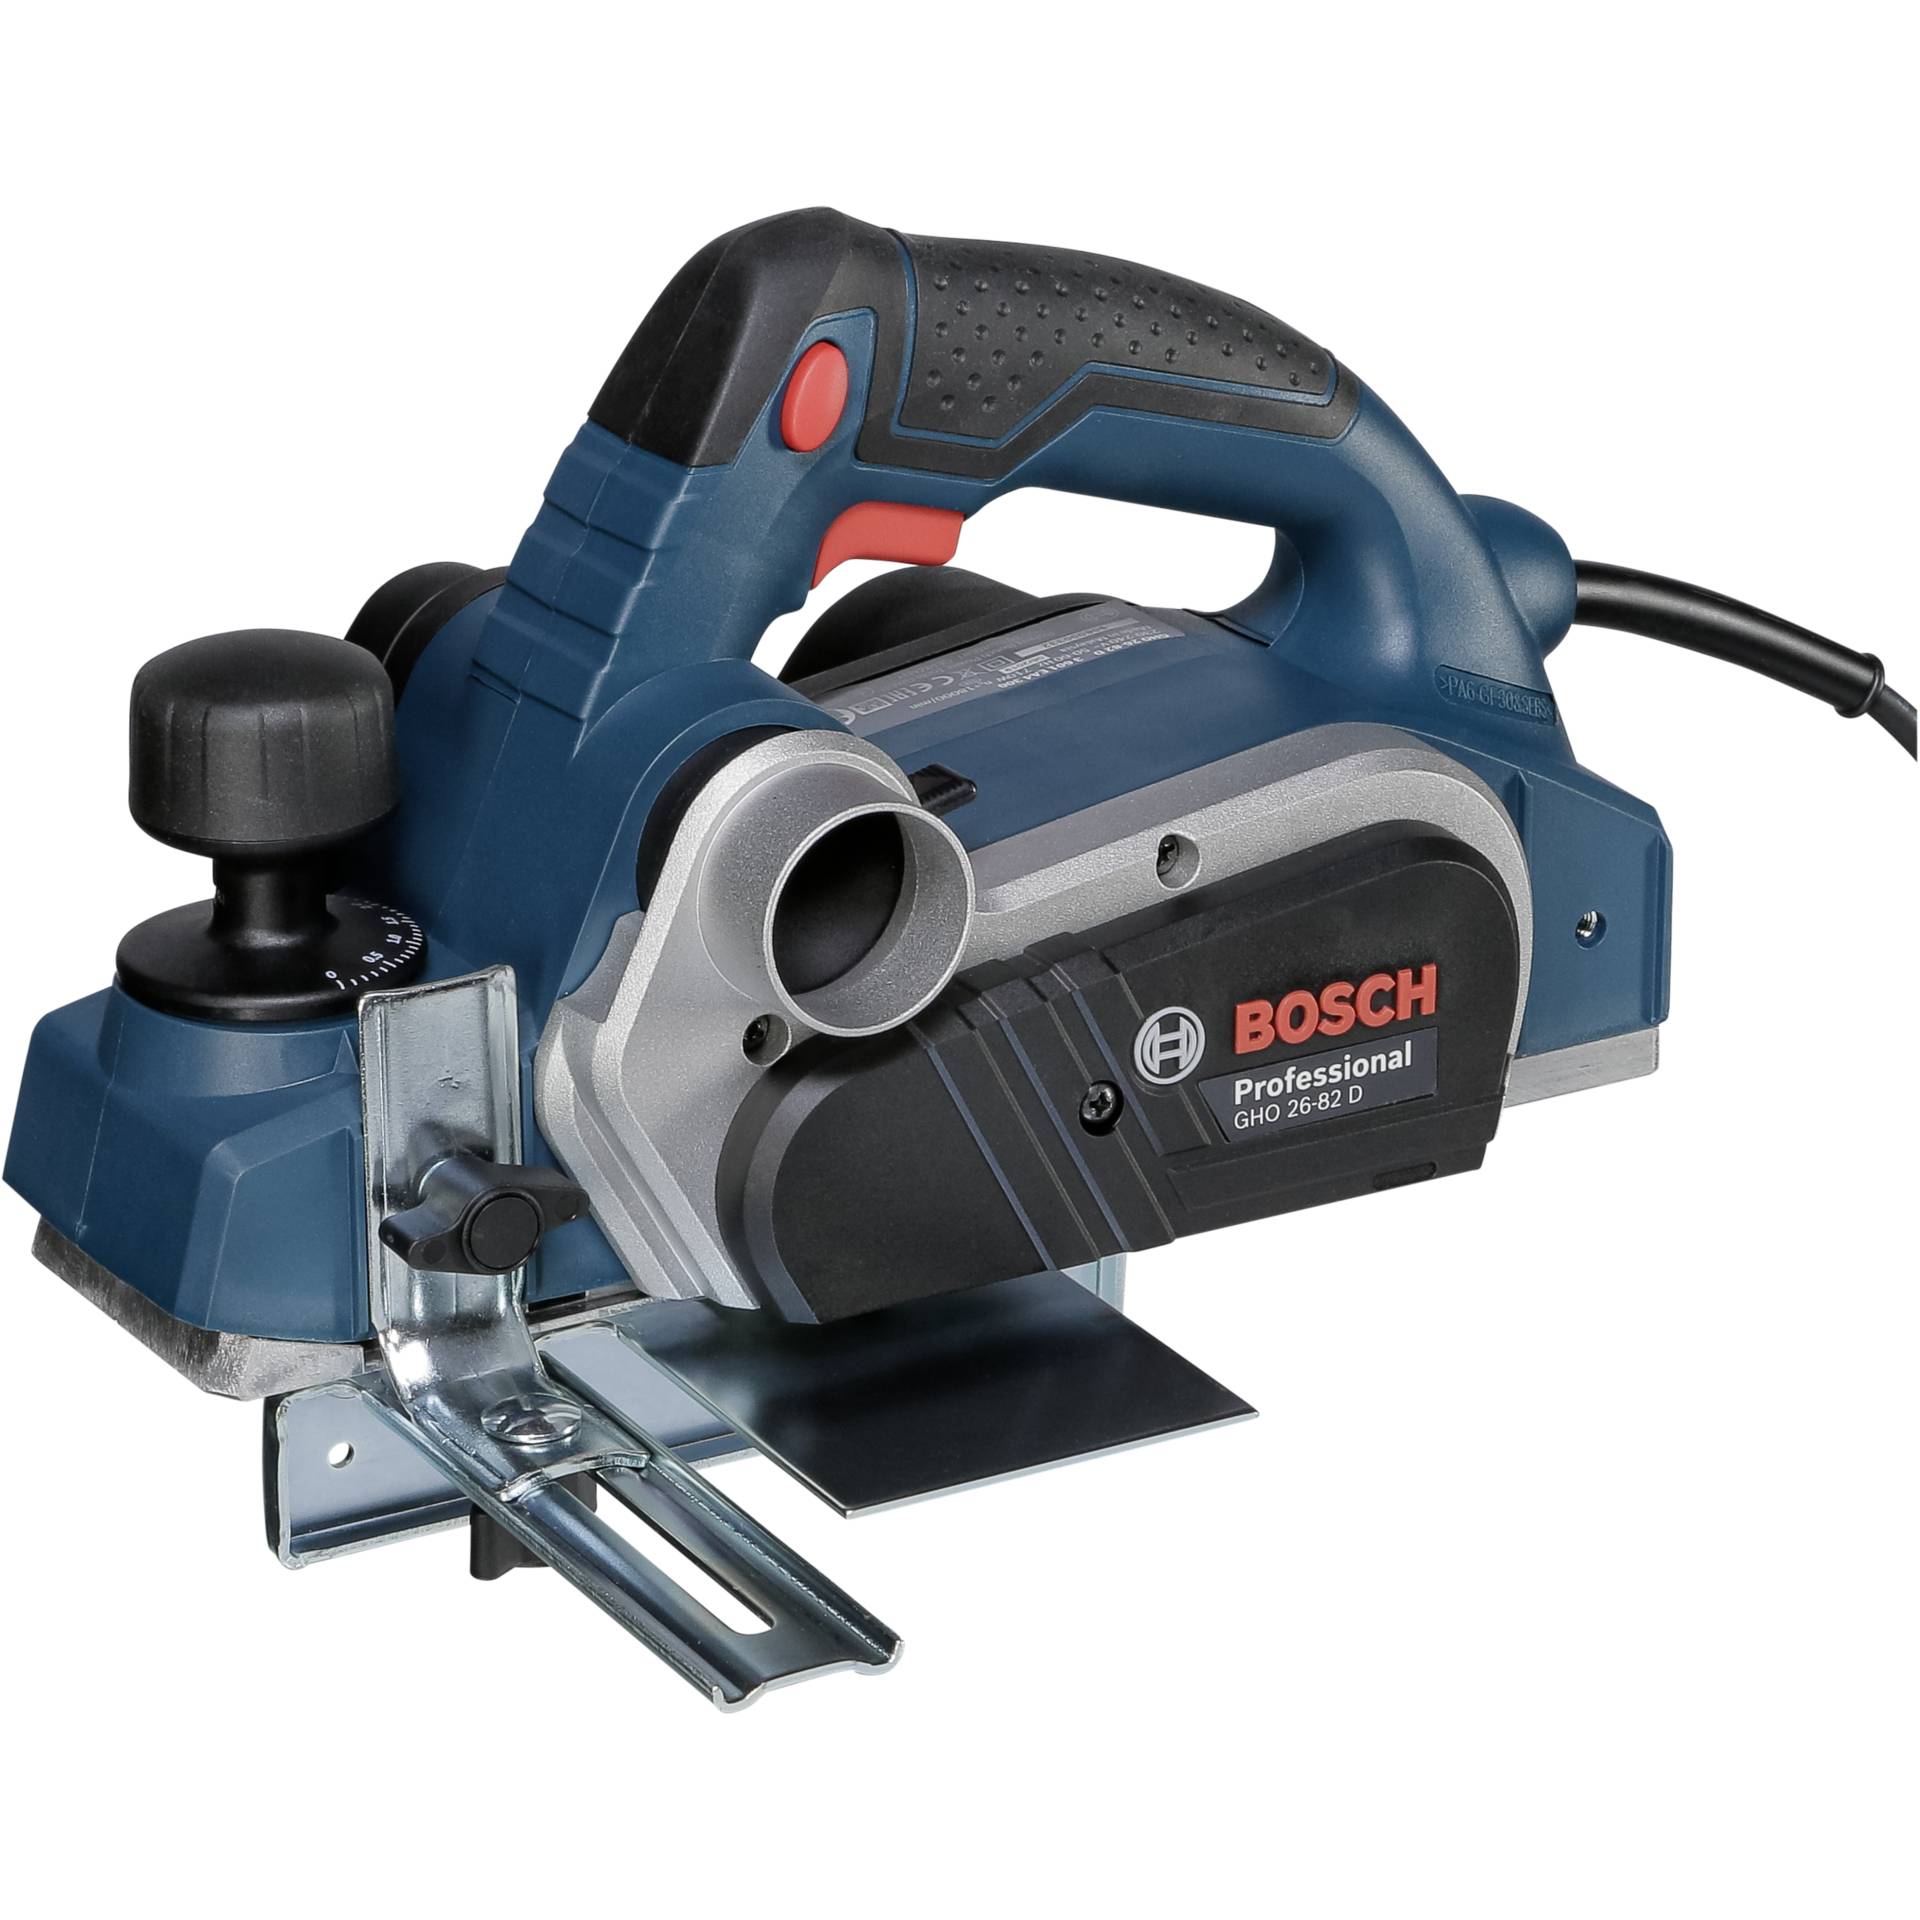 Bosch GHO 26-82D Professional Pialletto